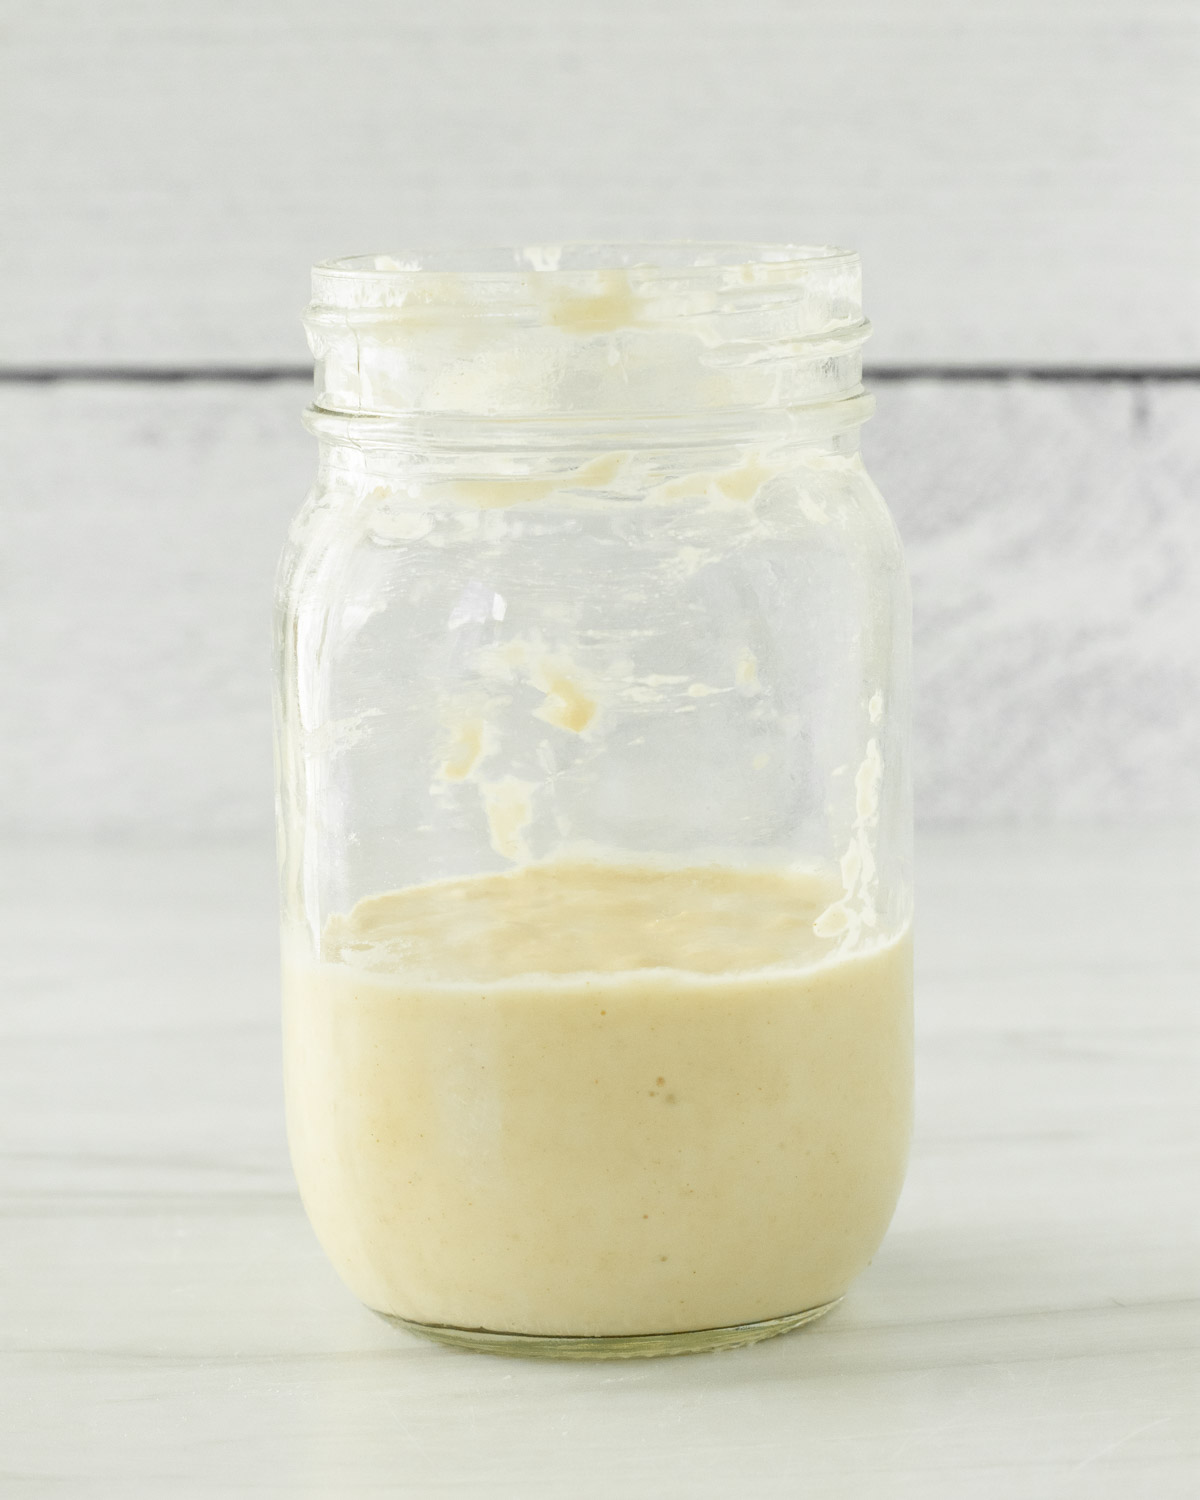 On days 6 and 7, discard and feed the sourdough starter every 12 hours (in both the morning and evening)